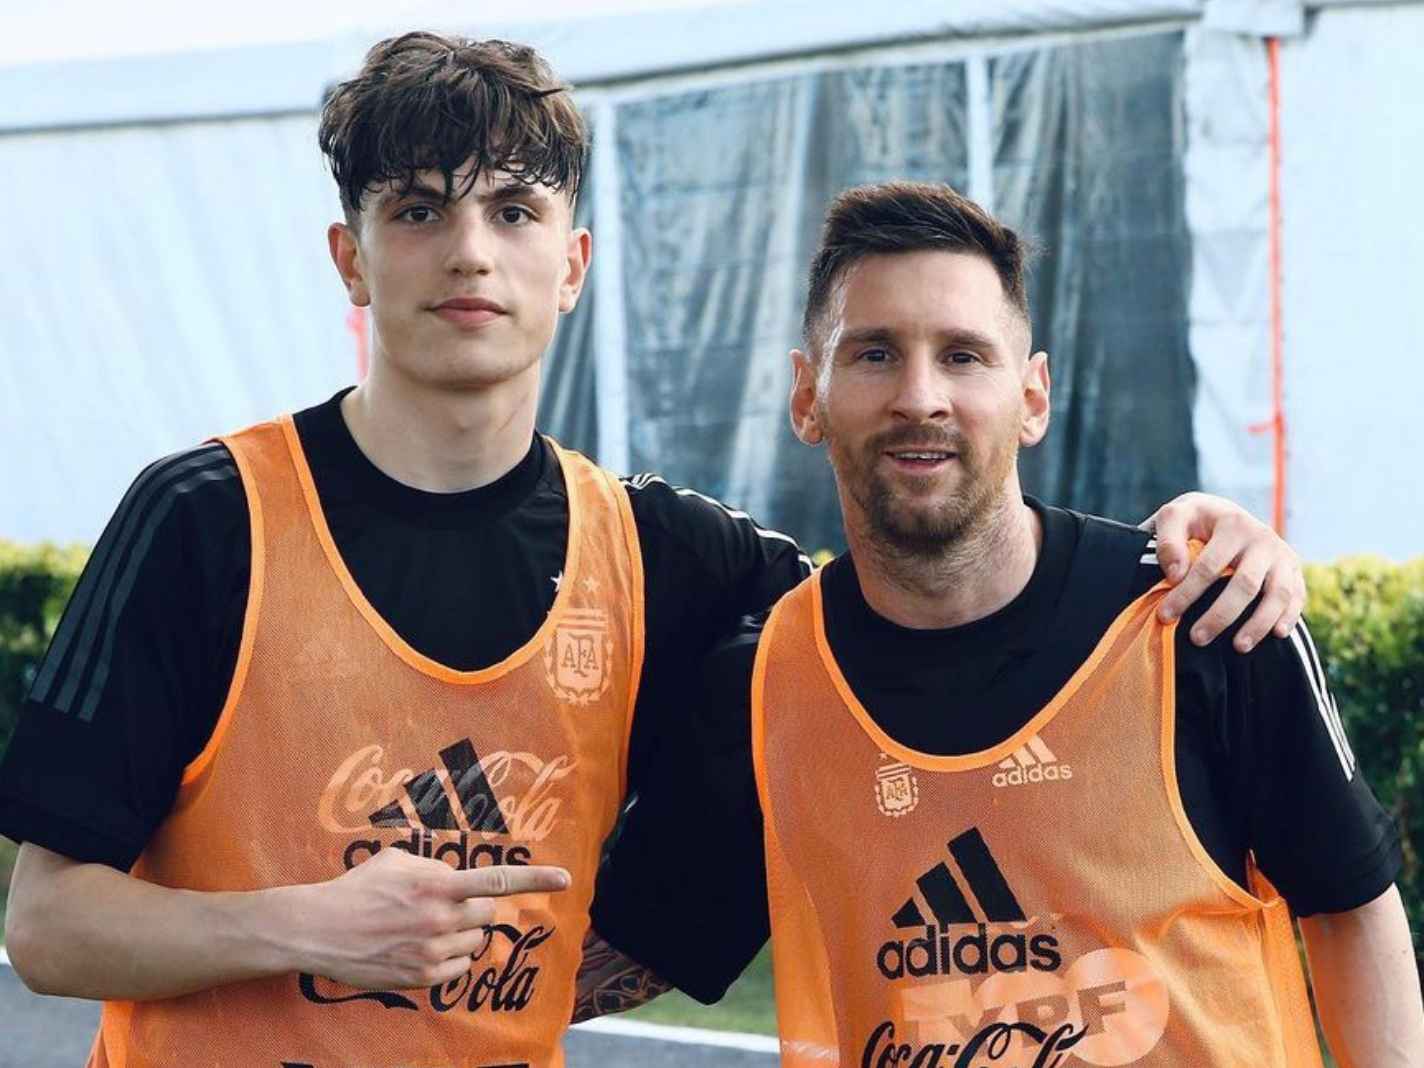 These Argentina U20 players got to train with Lionel Messi for the first time and their Instagram posts afterwards were beautiful